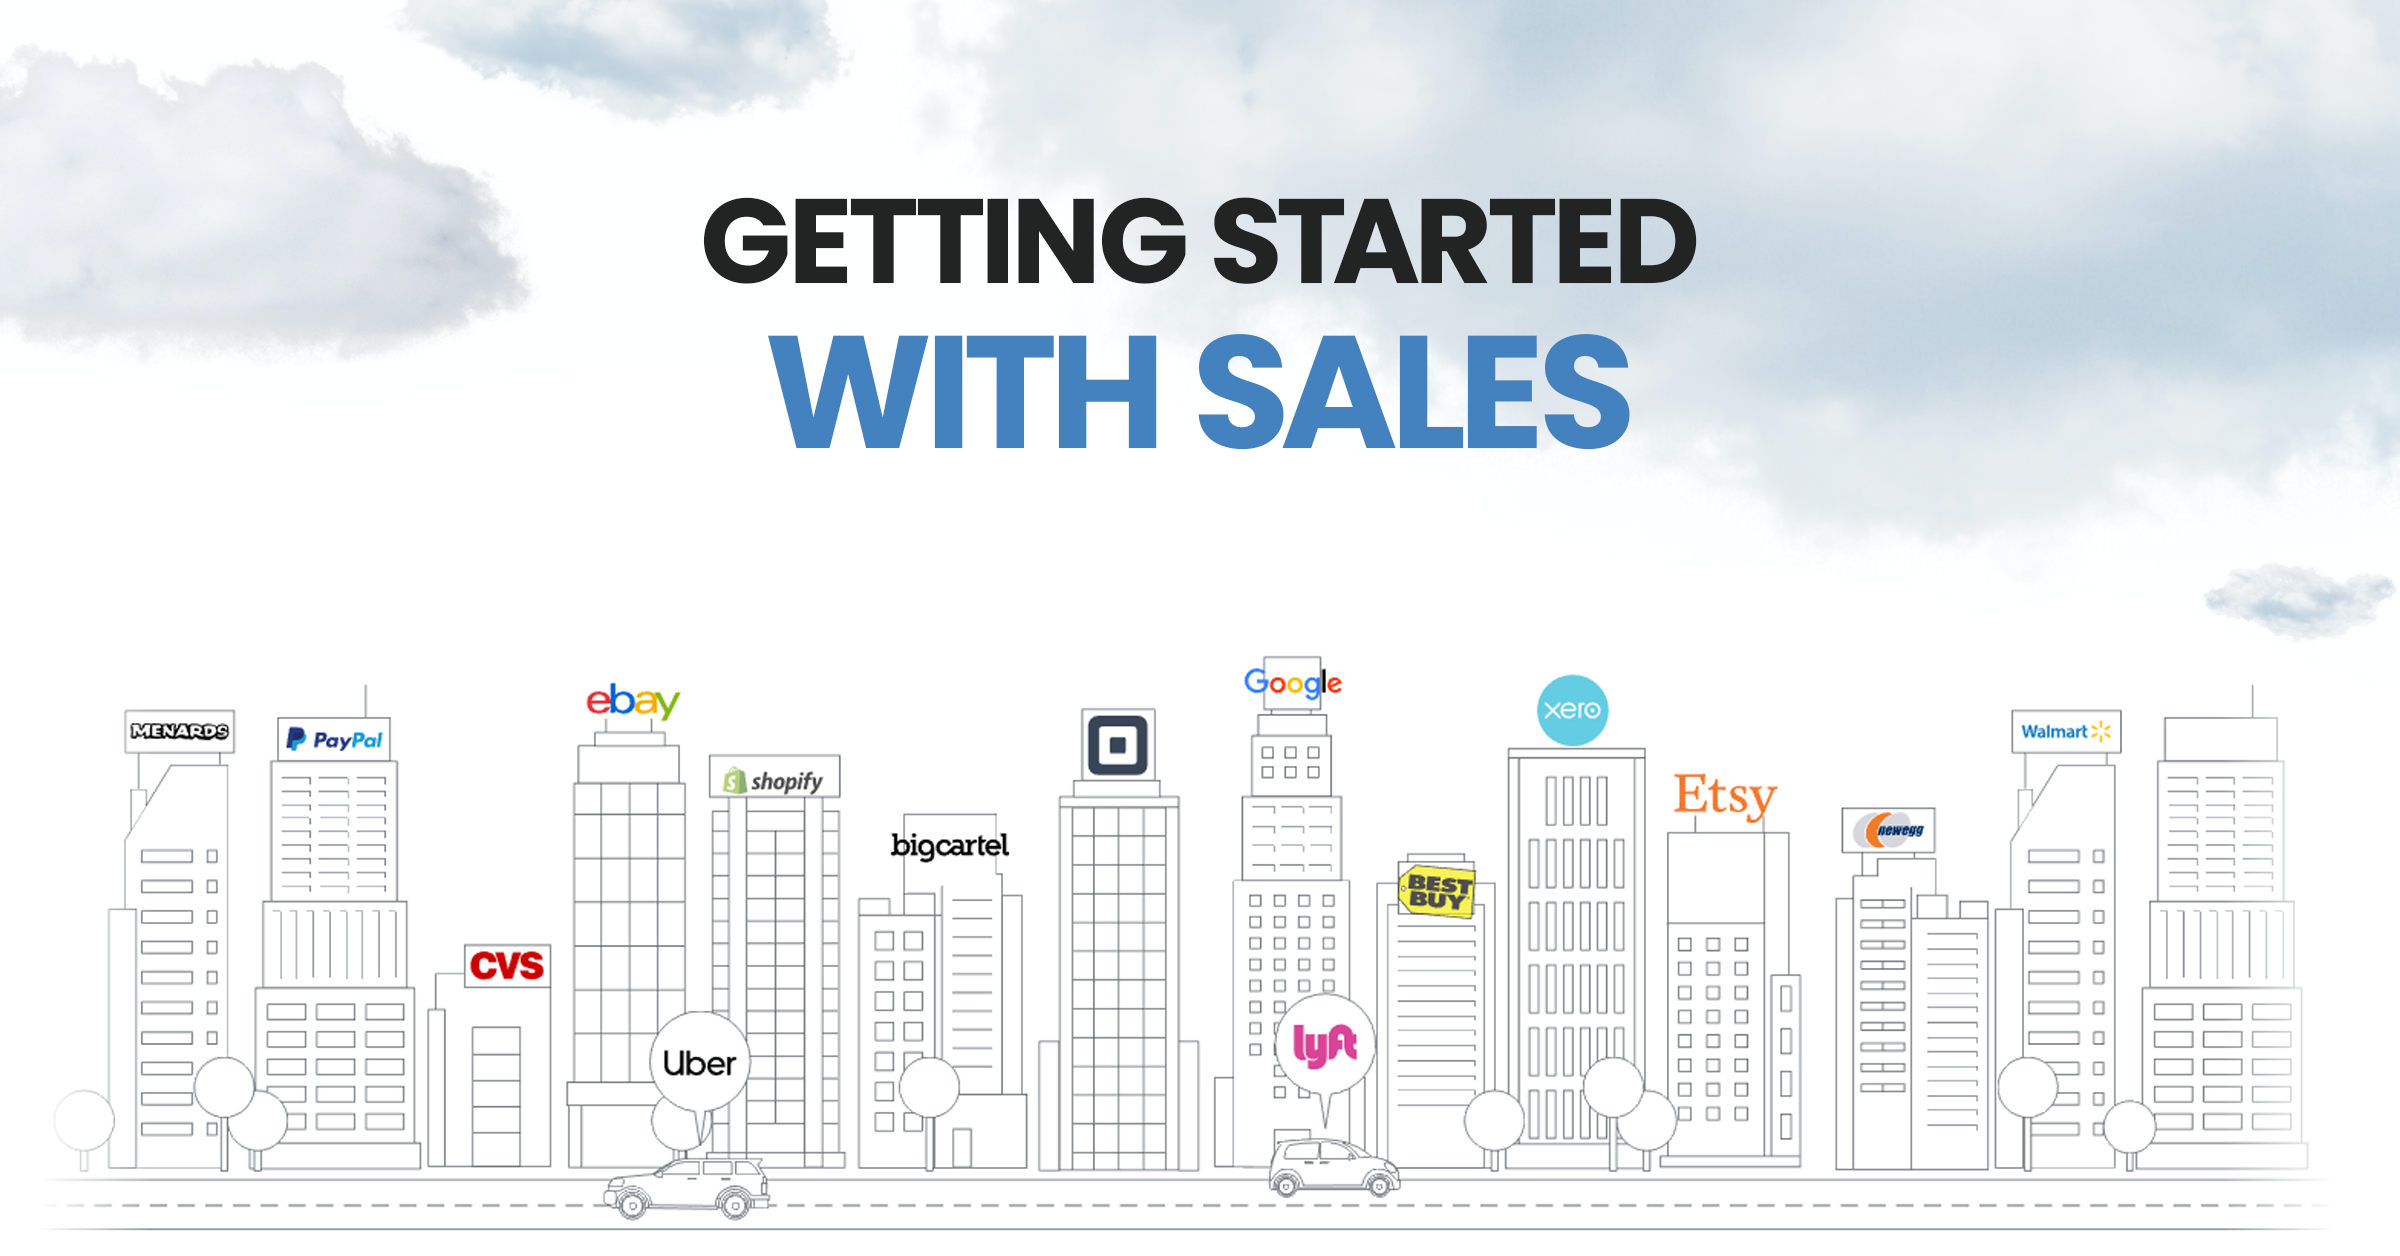 Get Started with Sales